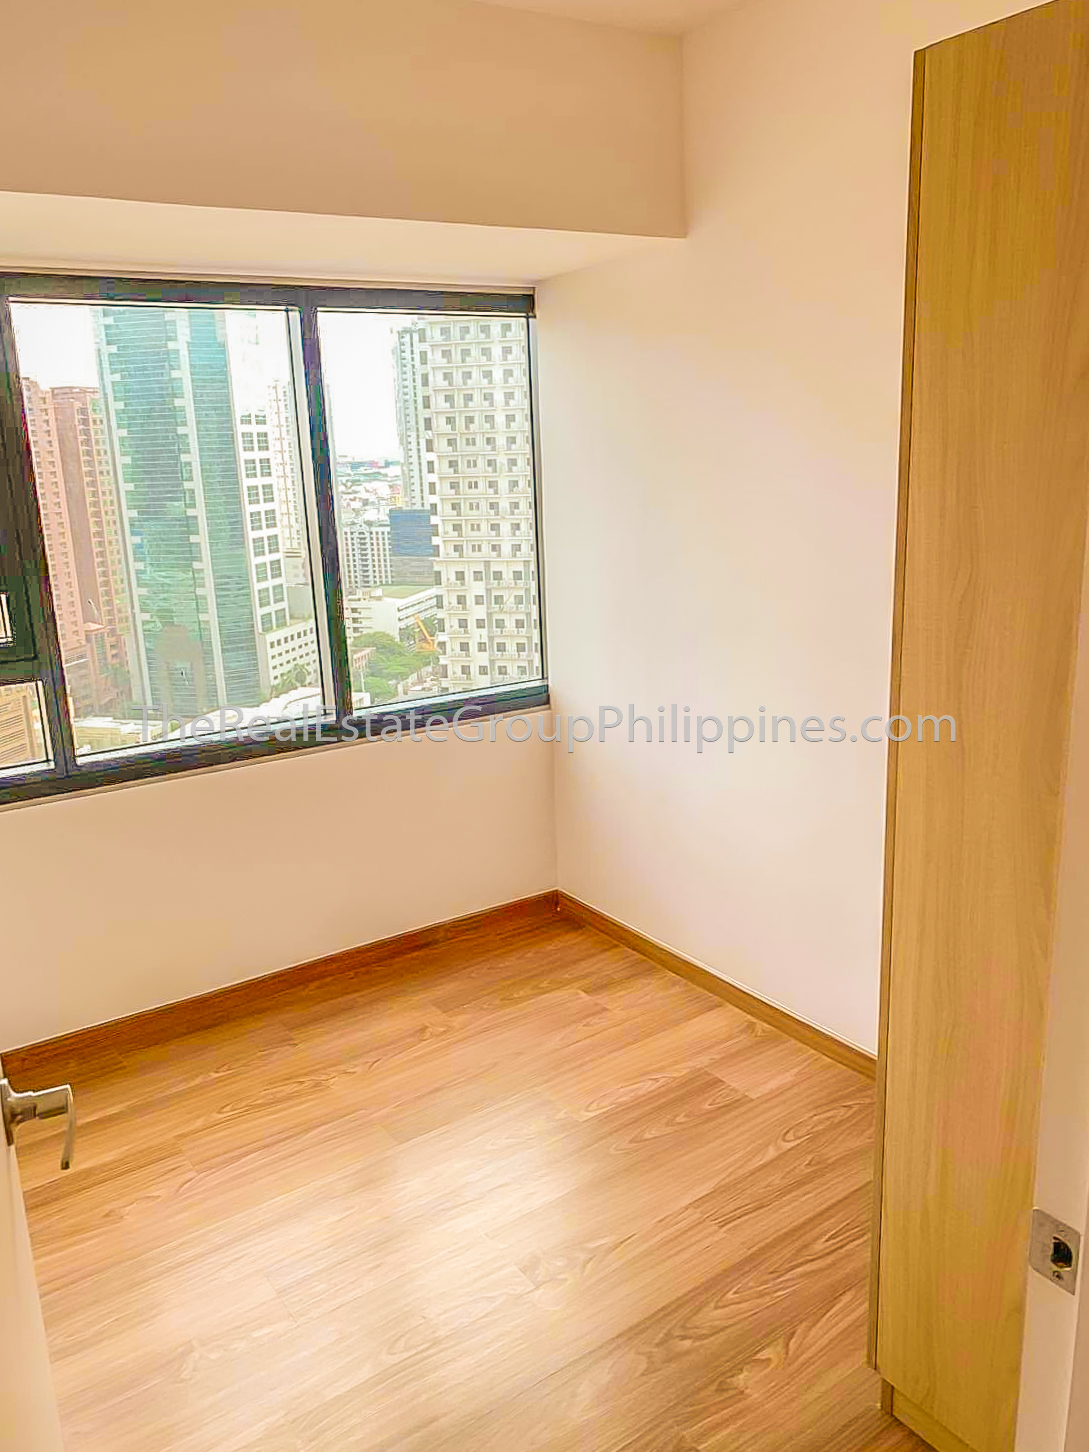 2BR Condo For Rent Lease The Rise Makati 70k (1 of 9)